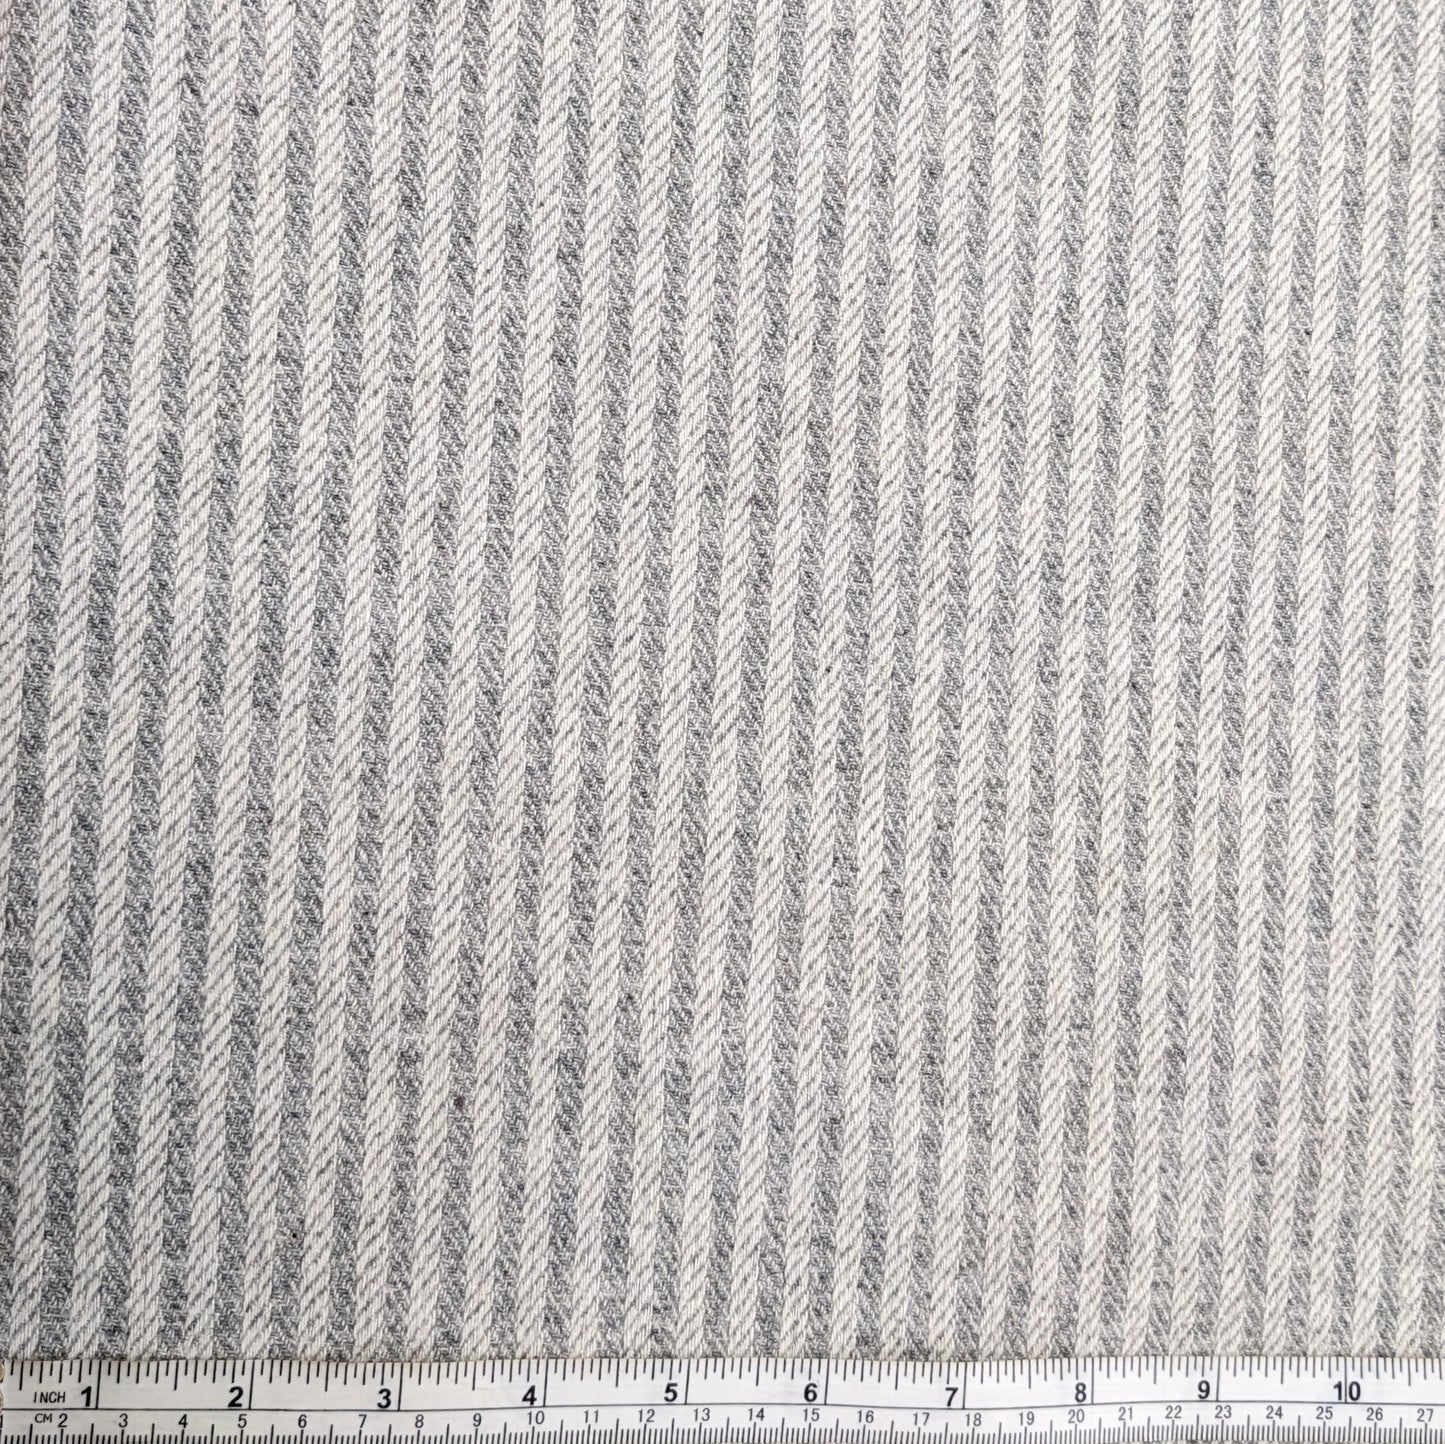 Wool and Polyester Tweed Stripe Fabric - Silver and Cream